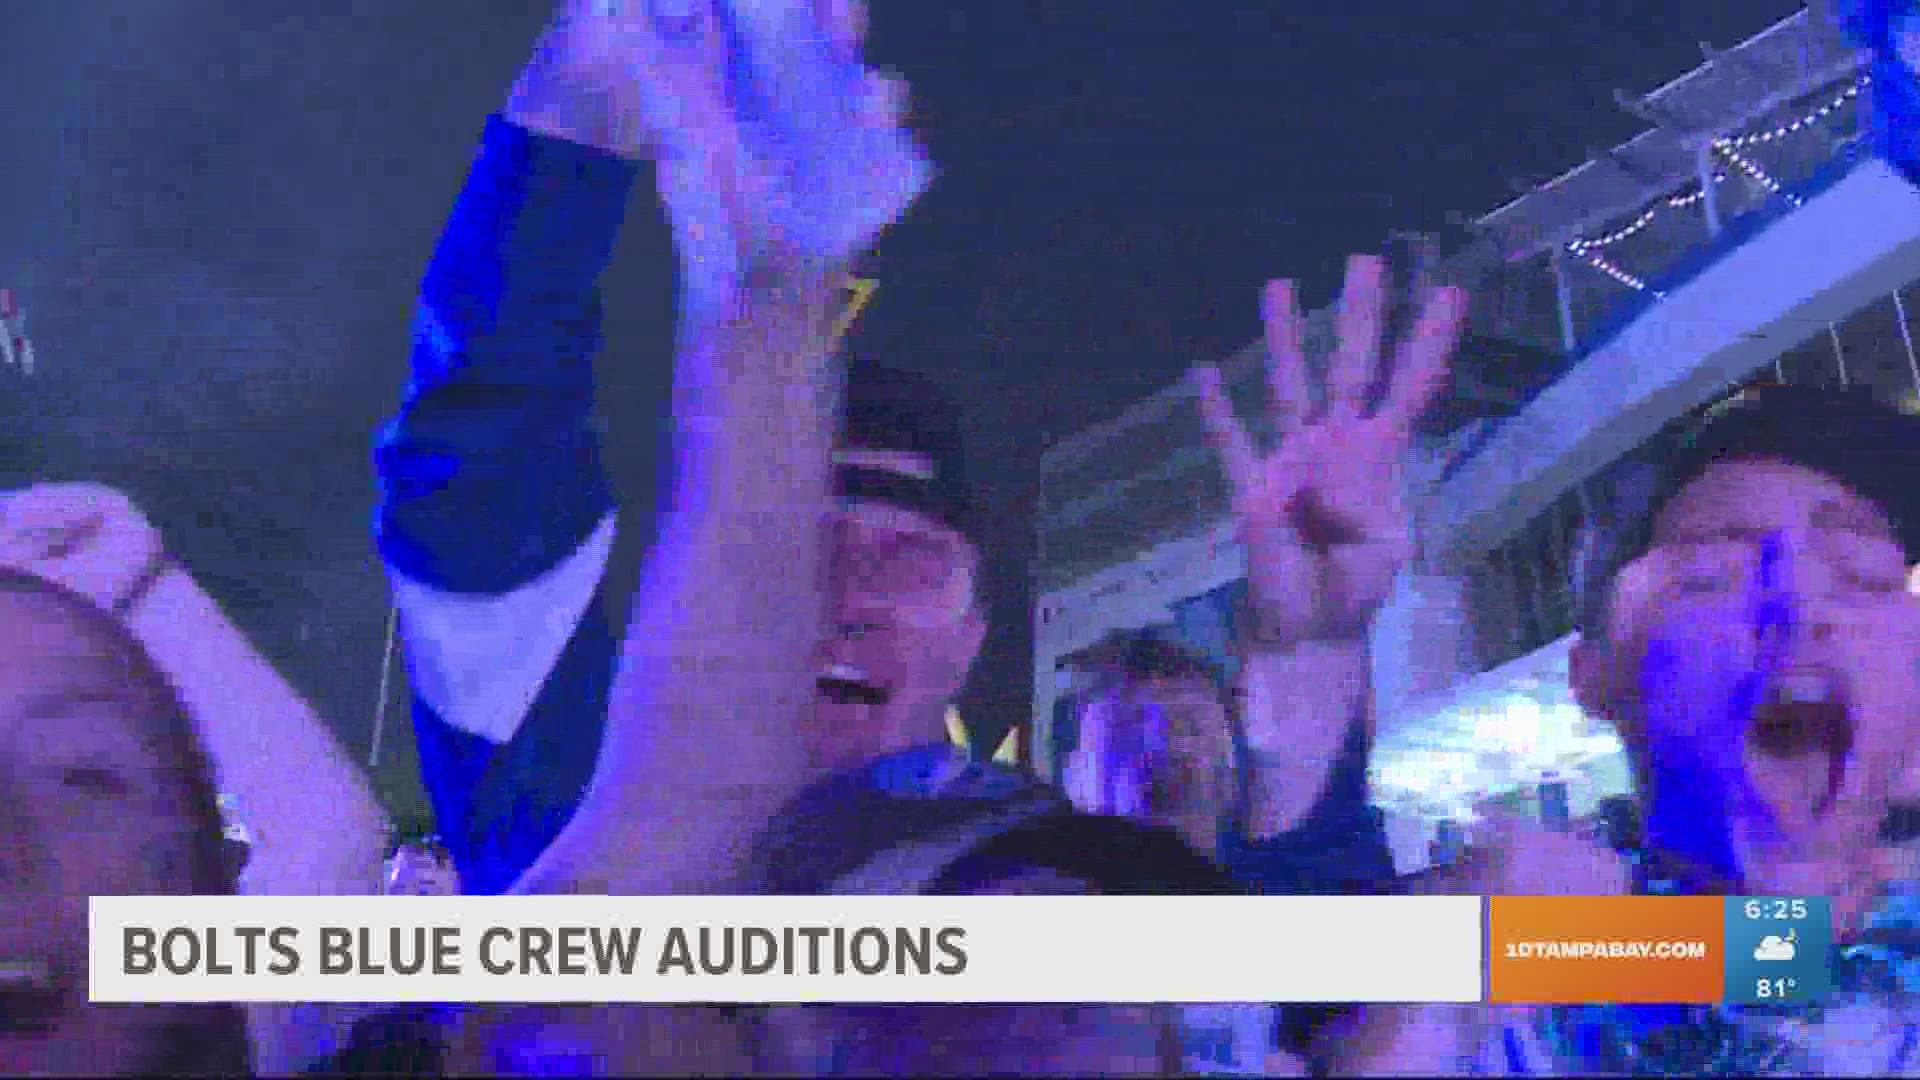 The Blue Crew engages with fans during Tampa Bay Lightning home games at Amalie Arena.